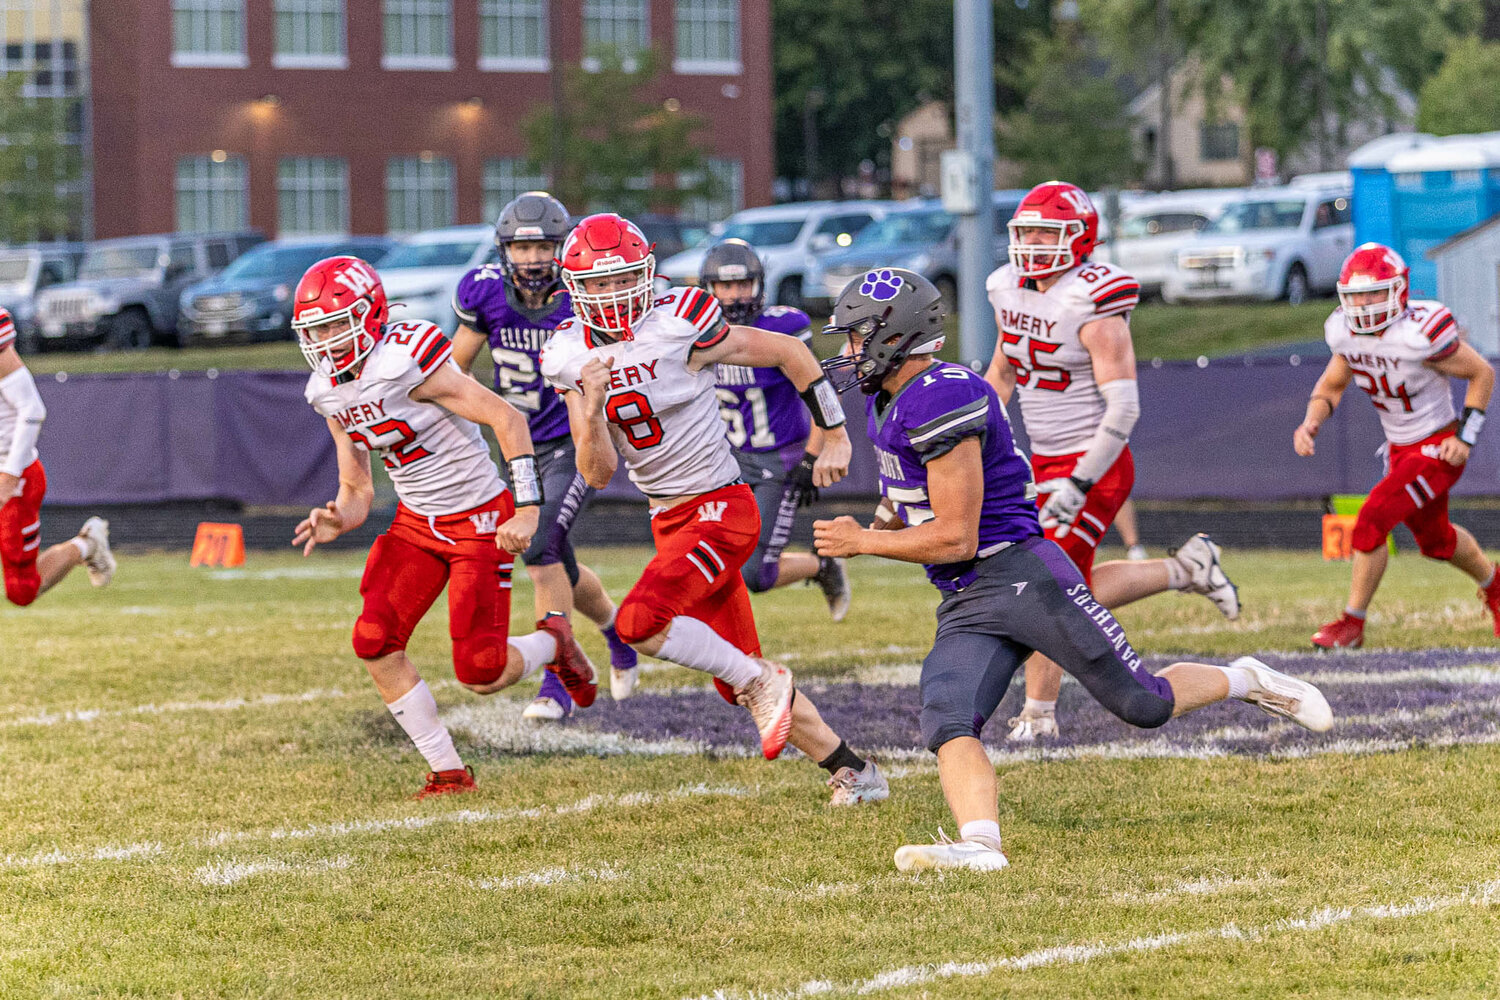 Quarterback Griffin Blomberg rushing the ball Friday vs. the Amery Warriors.